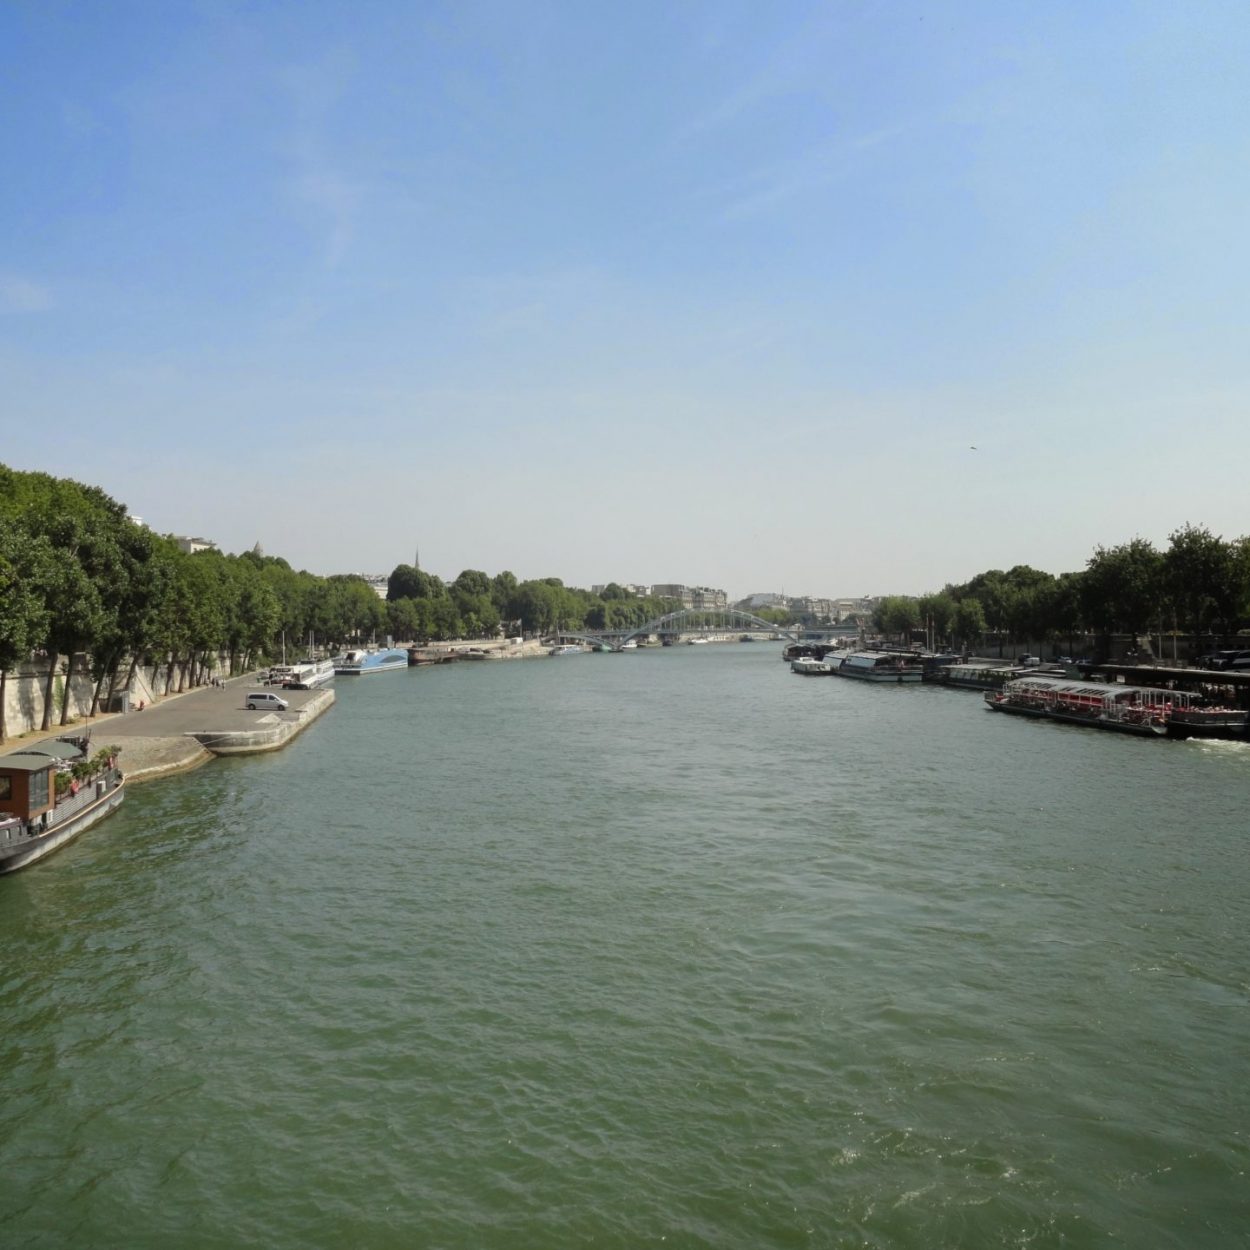 The Seine river seen from a bridge over it.